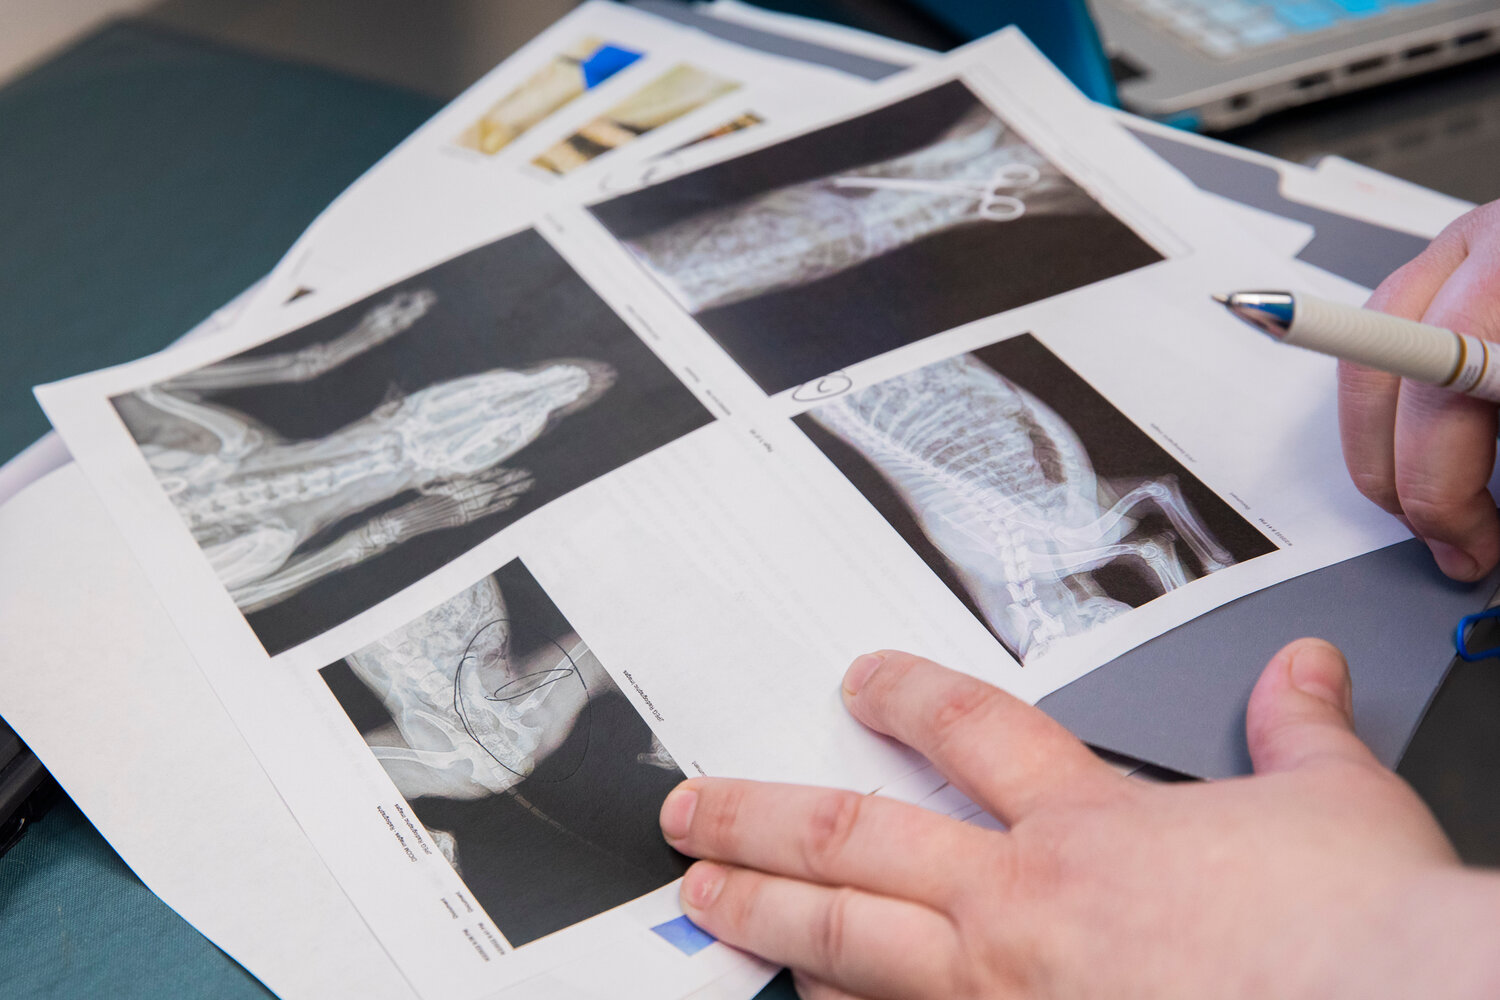 X-rays shown by Dr. Brandy Fay in Chehalis during an interview on Saturday, April 29 further explain the death of Buzzo, a 4-month-old cattle dog puppy found next to Aron Christensen, 49, a Portland hiker who was also dead.